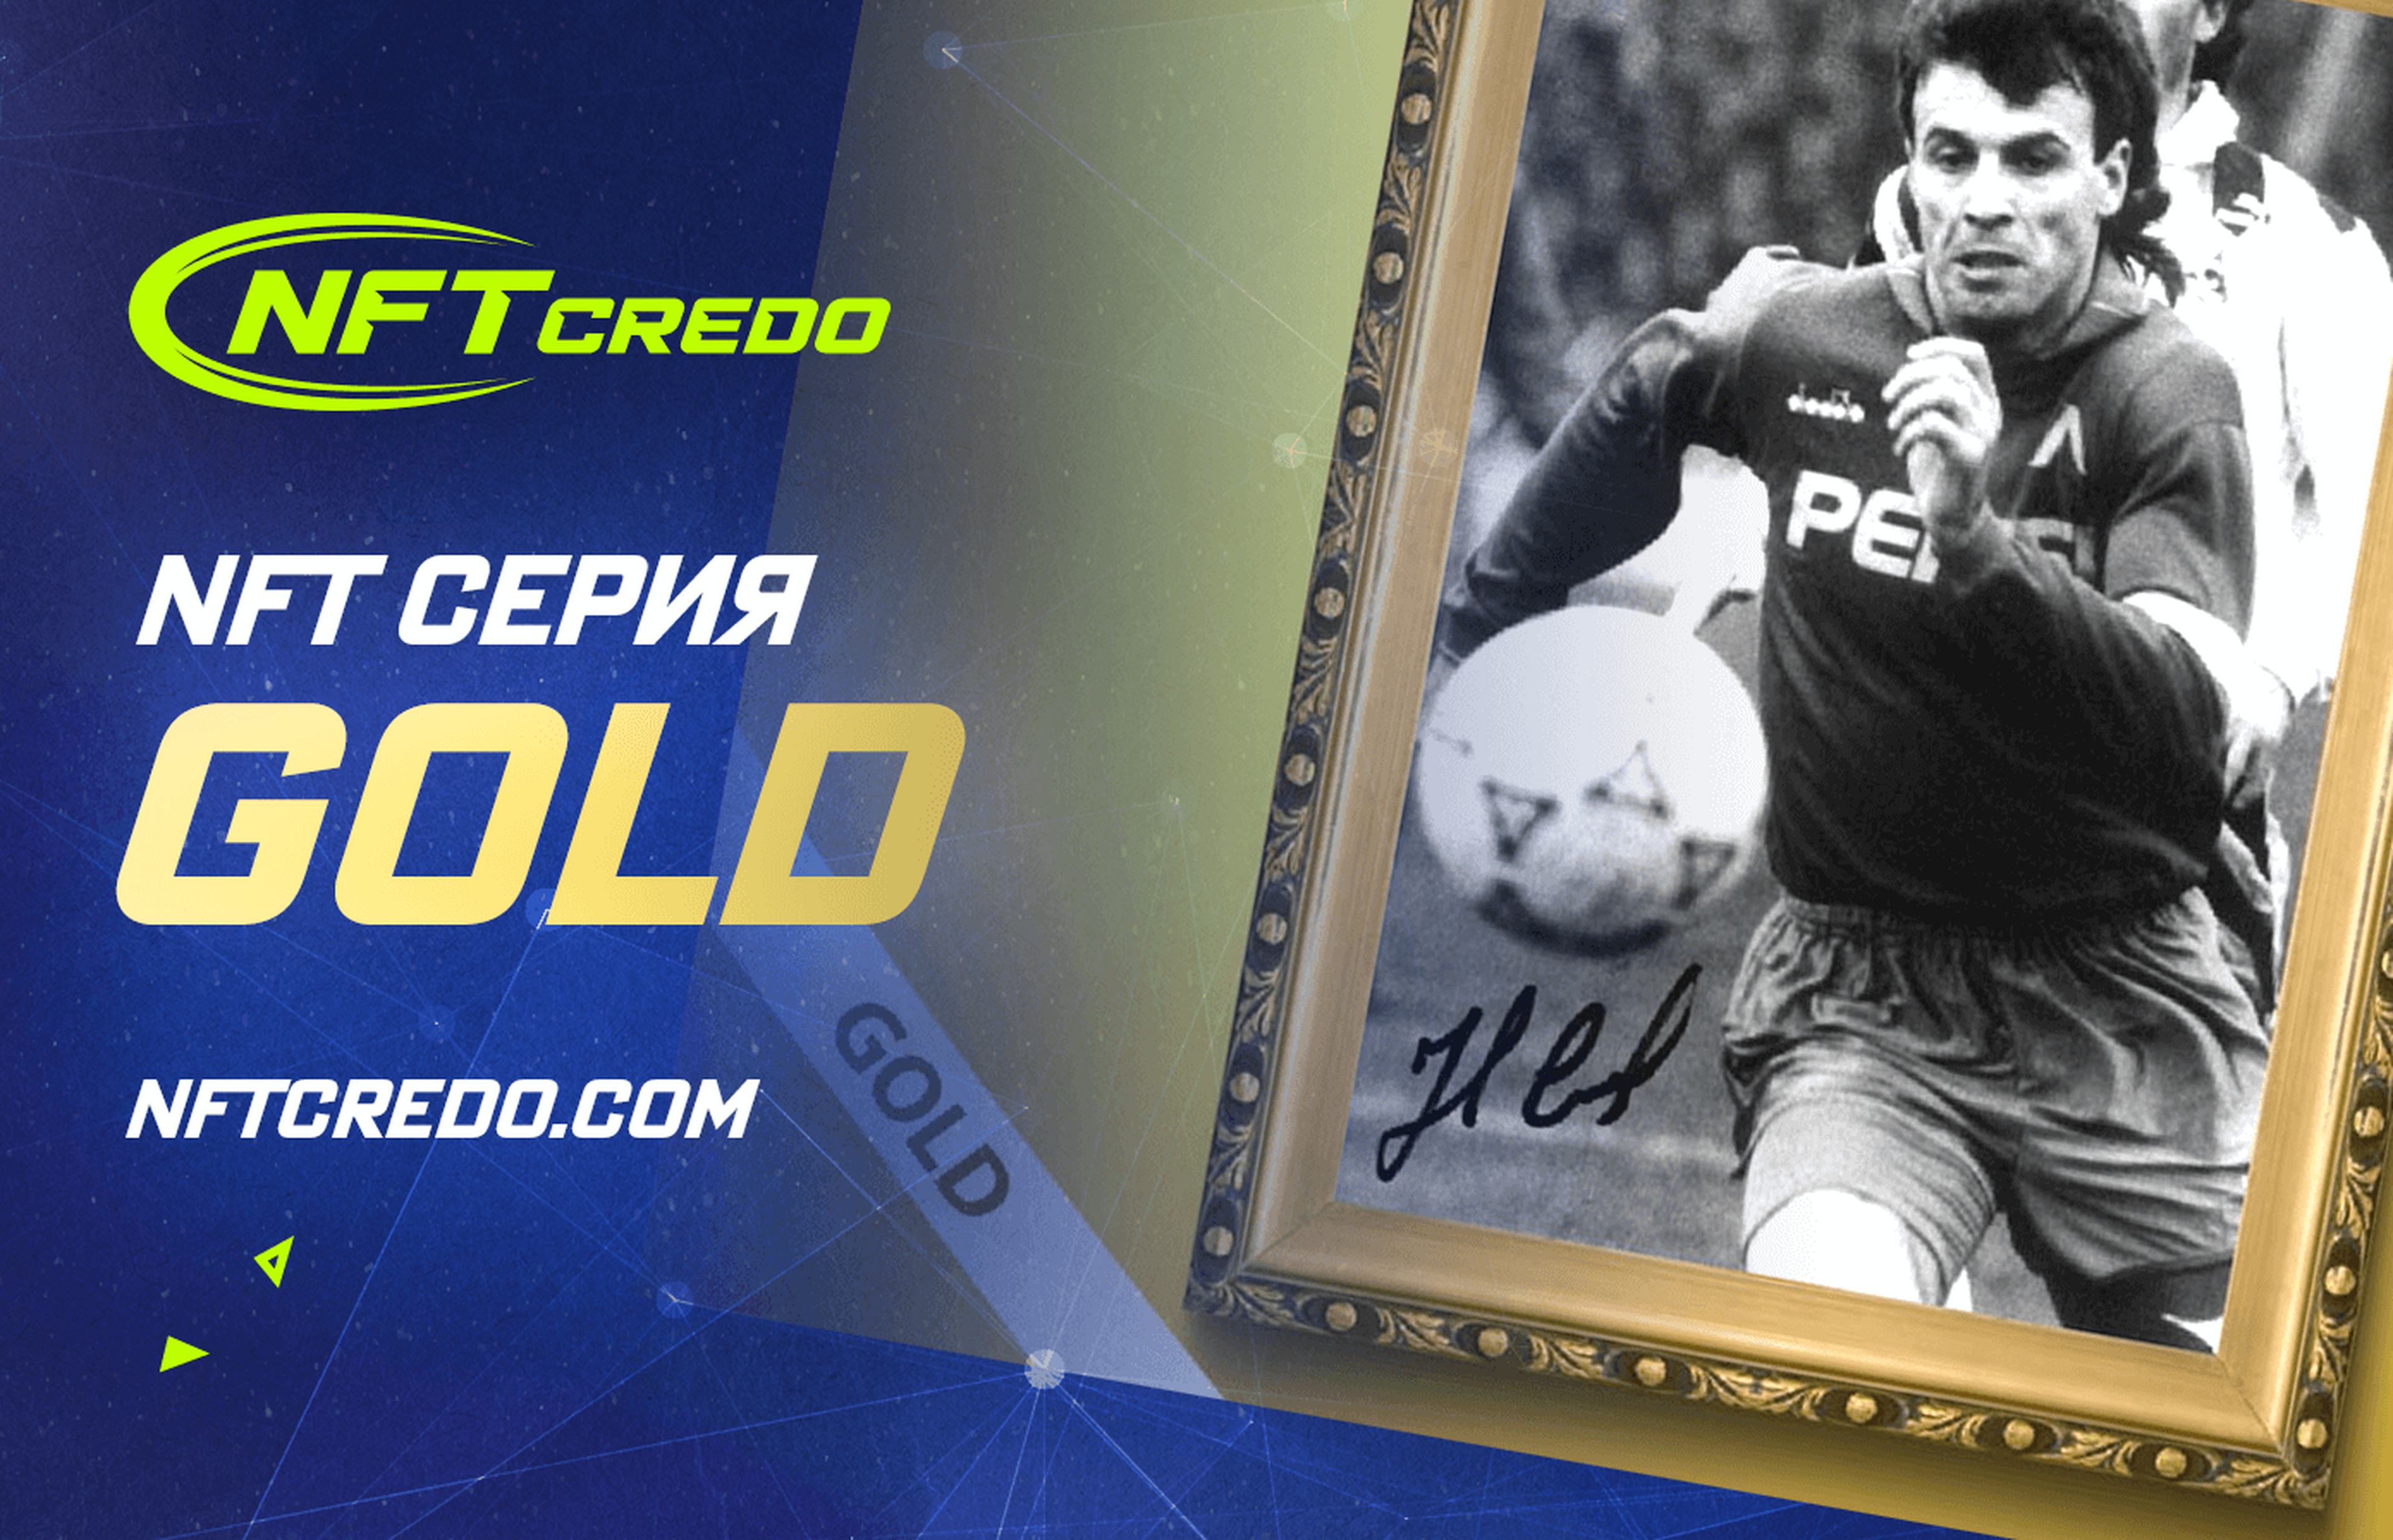 NFT Credo launches the “Gold” Series